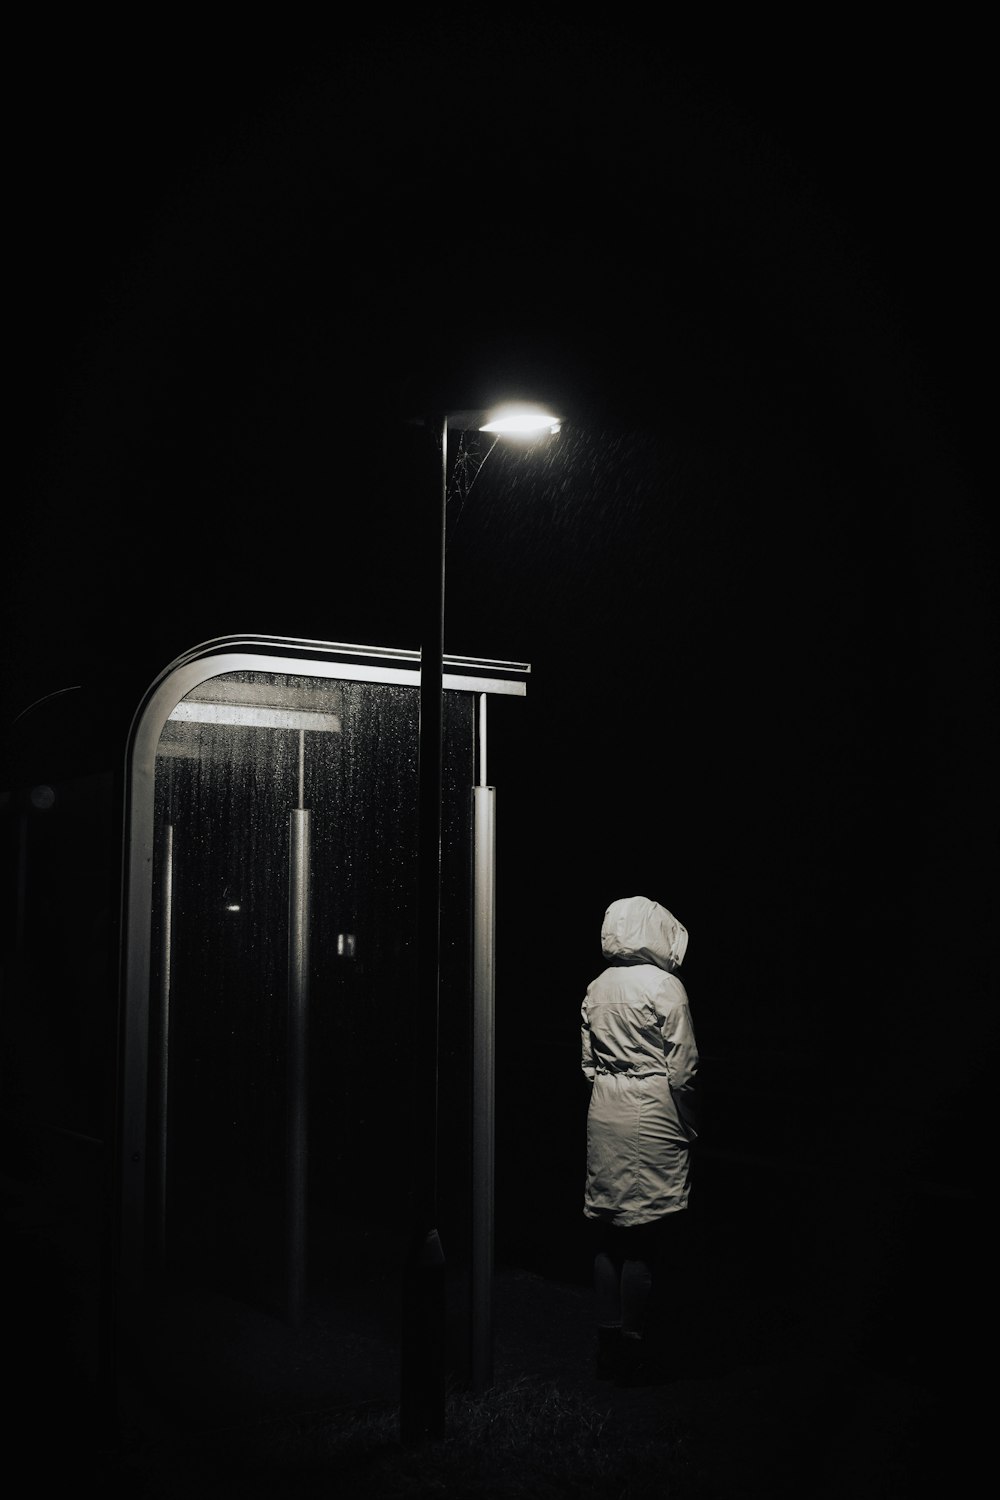 a person standing in the rain at night under a street light